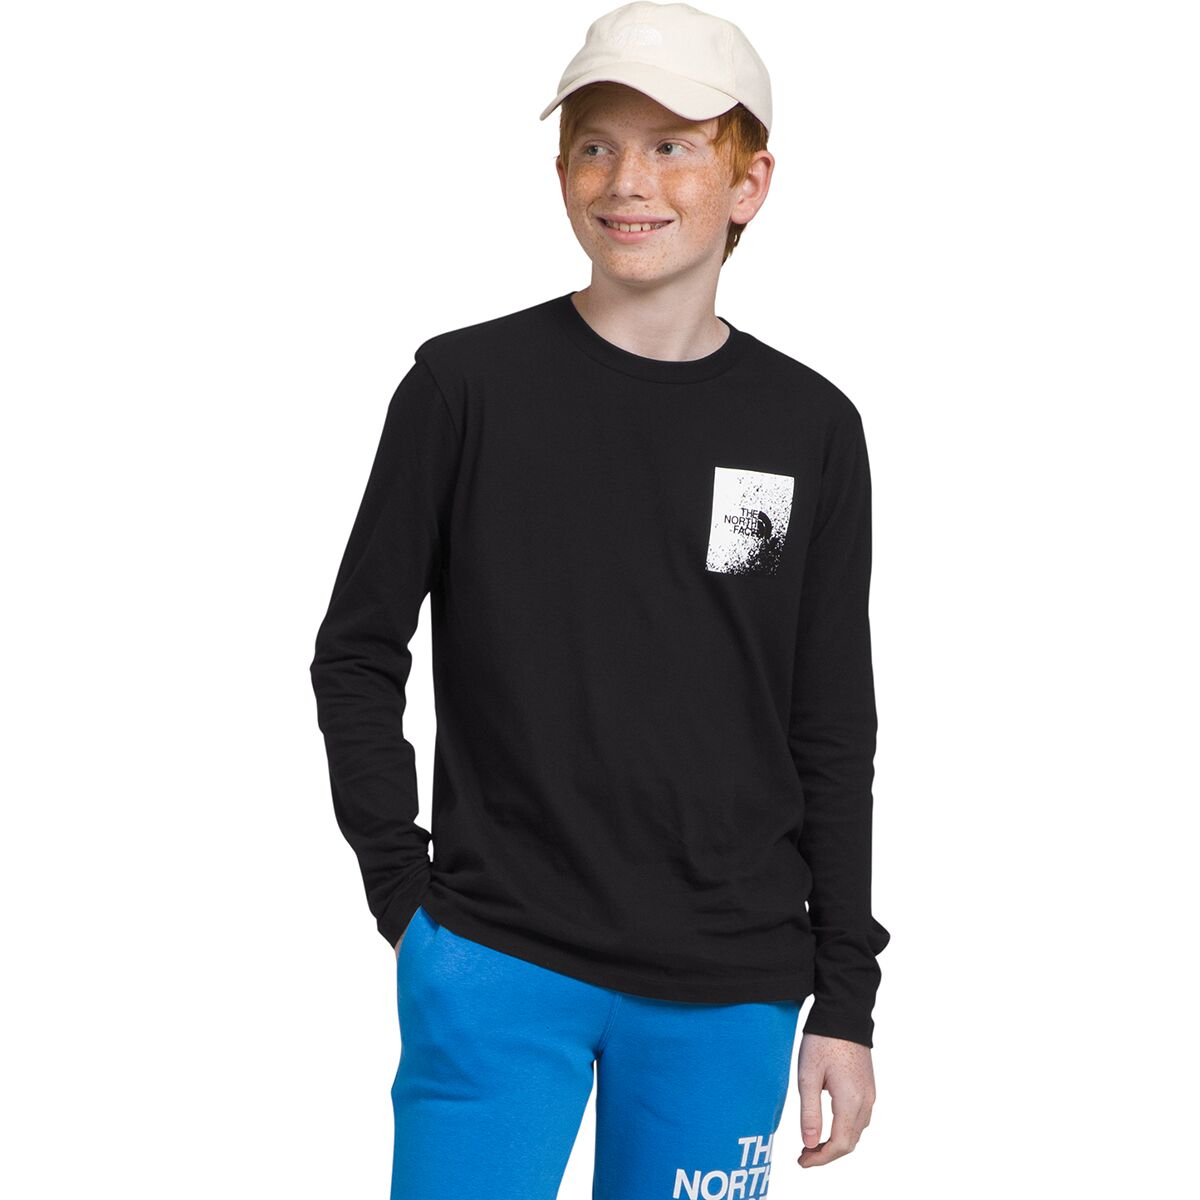 The North Face Graphic Long-Sleeve T-Shirt - Boys